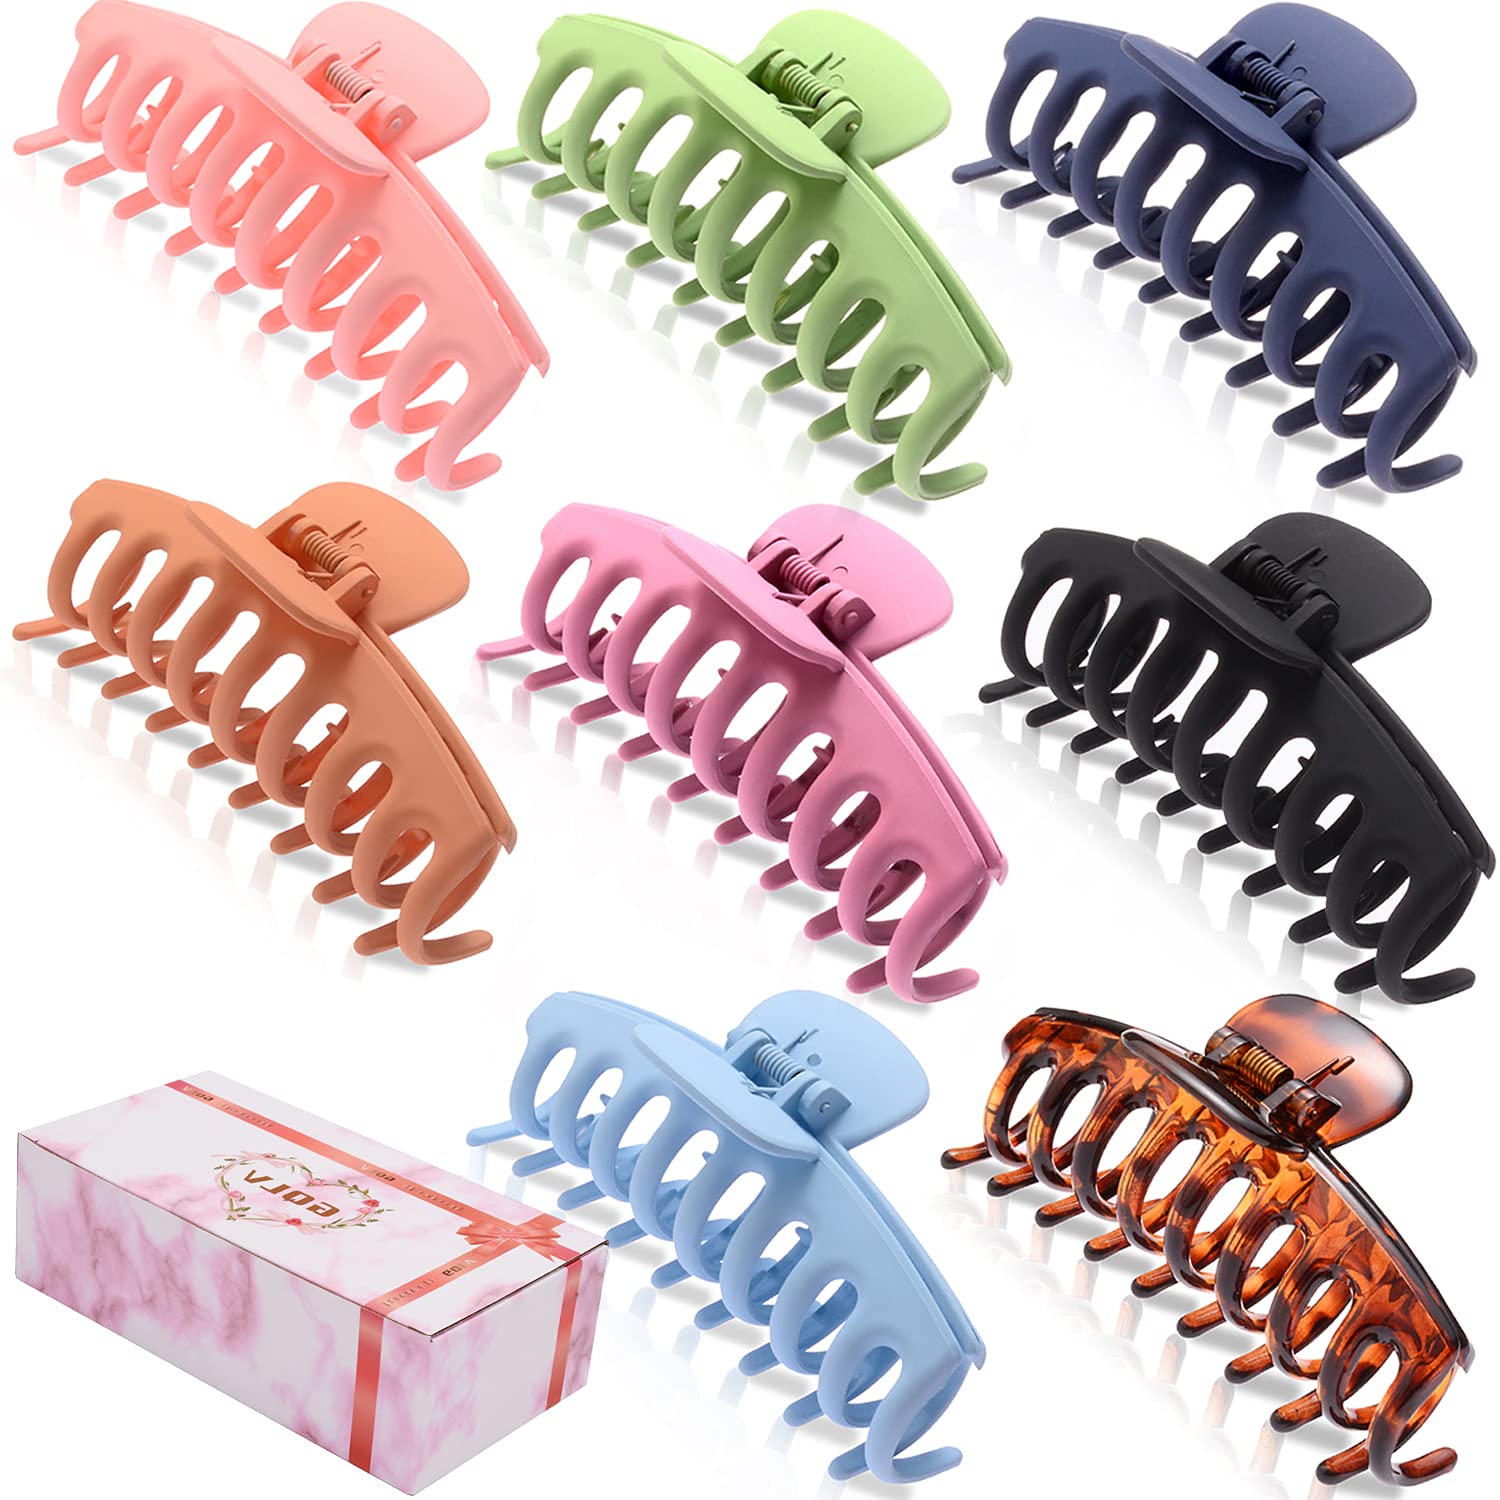 GQLV 8 PCS Large Hair Claw Clips for Women,4.4 Inch Big Banana Hair Clips  for Thick Hair/Thin Hair,Nonslip Jaw Hair Clips,Butterfly Hair Clips ,Hair  Barrettes ,Fashion Accessories for Girls A-8pcs colorful